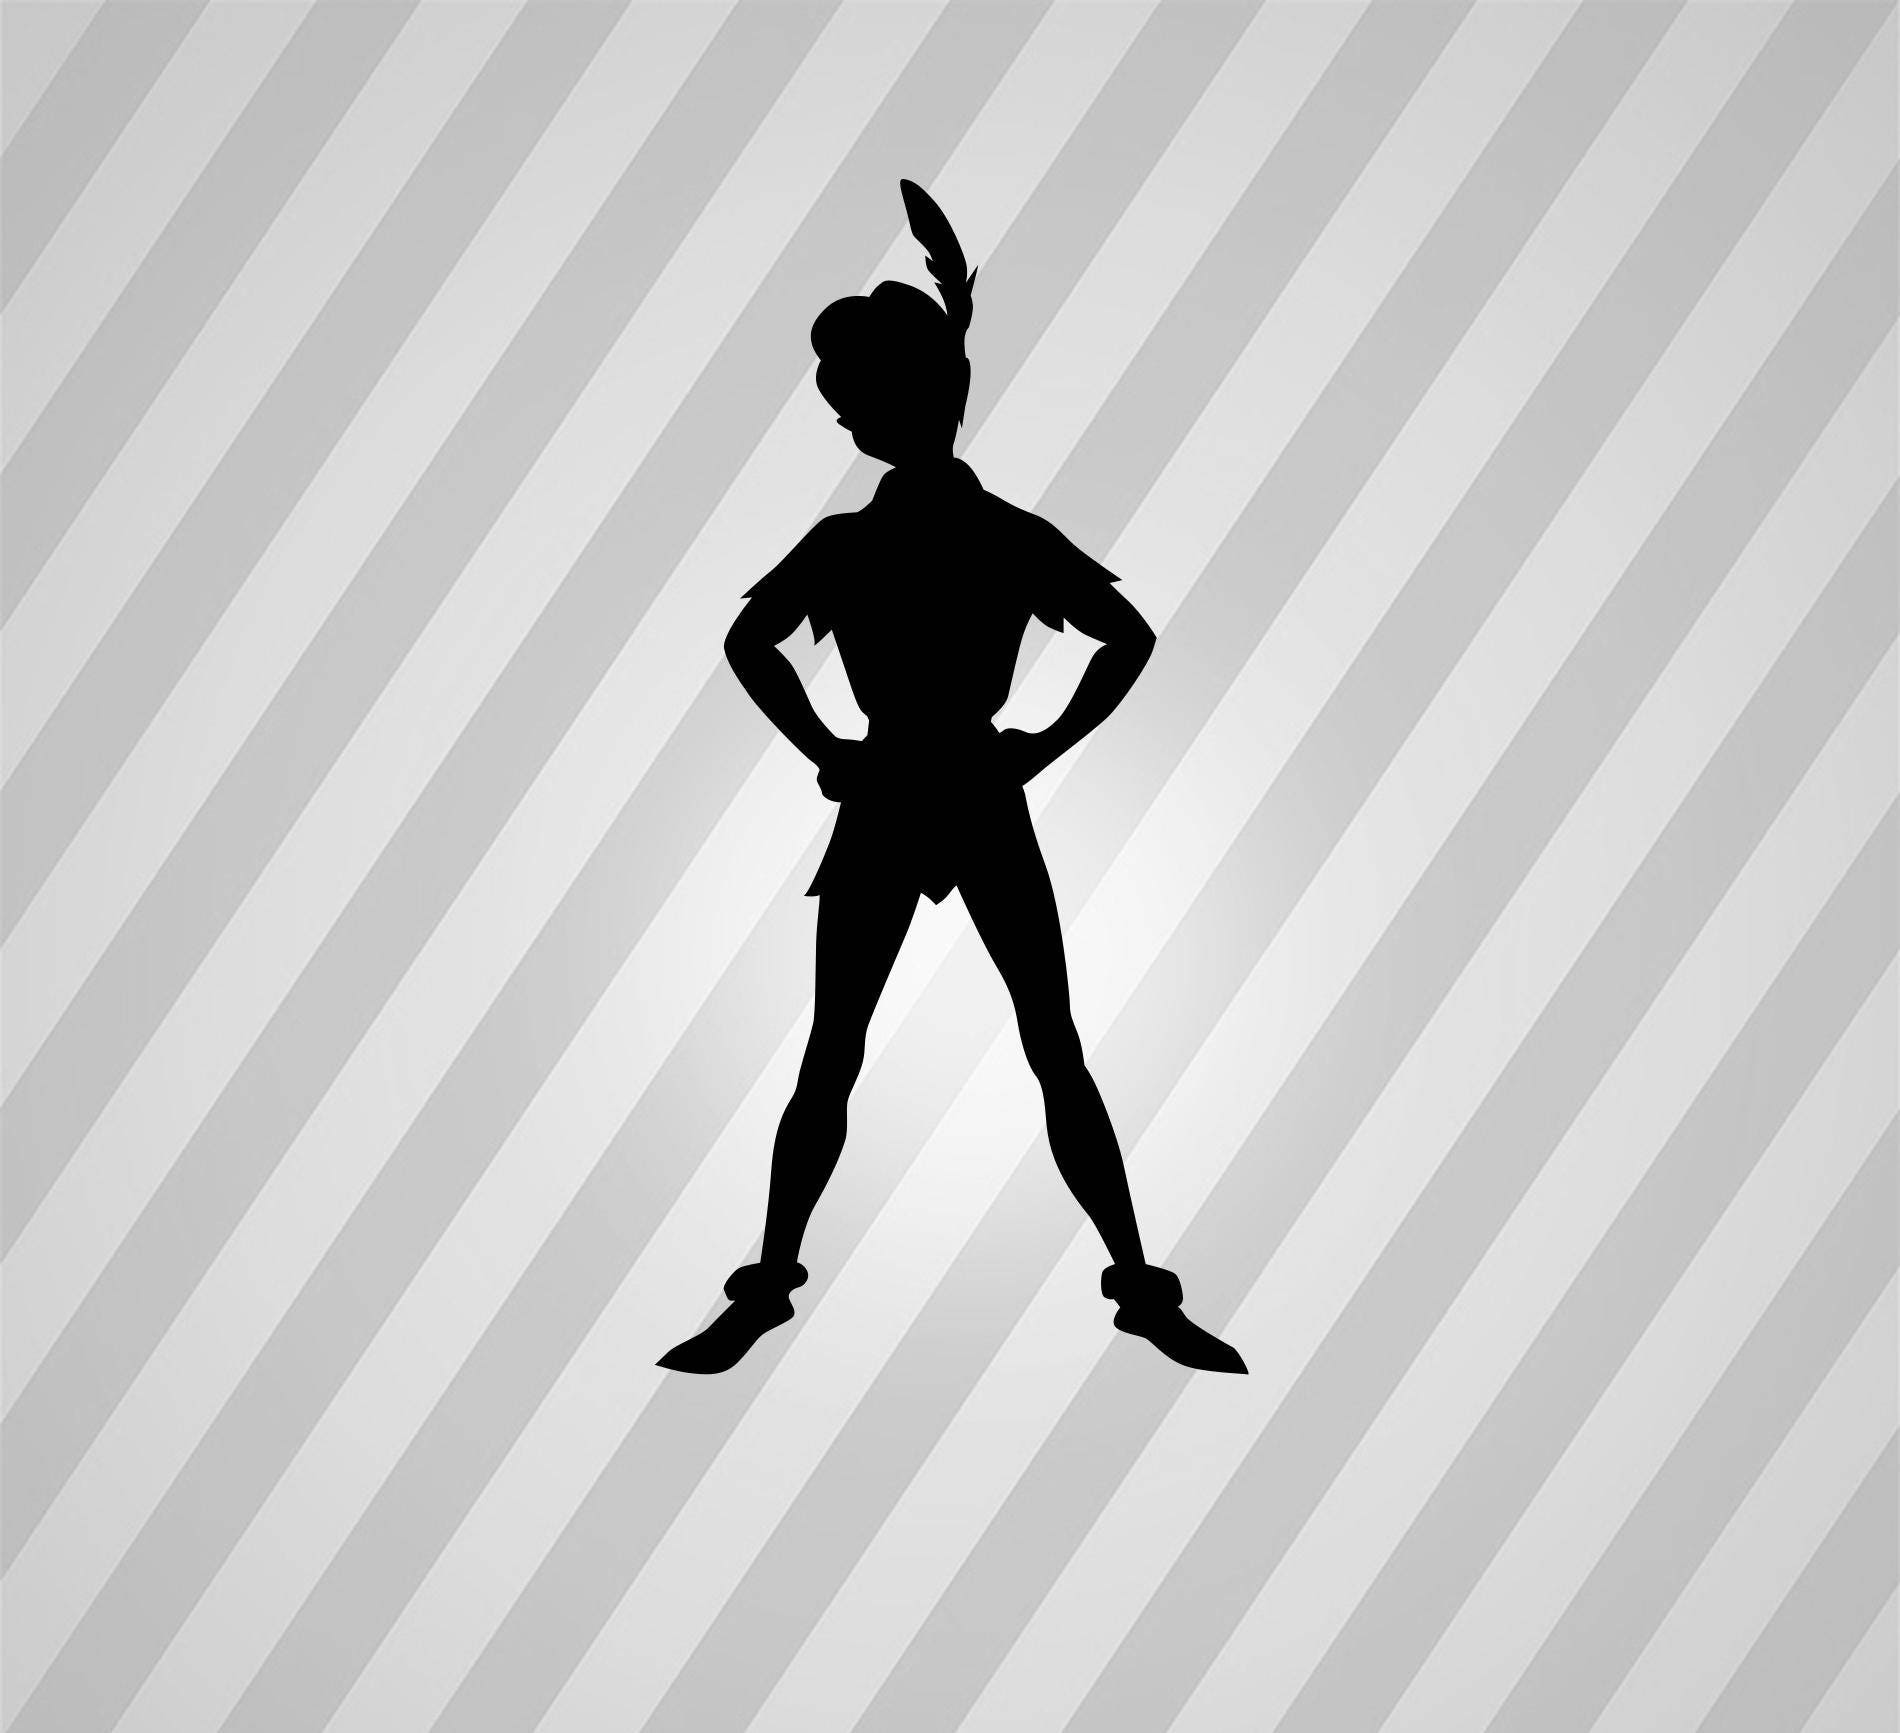 peter pan Silhouette - Svg Dxf Eps Silhouette Rld RDWorks Pdf Png AI